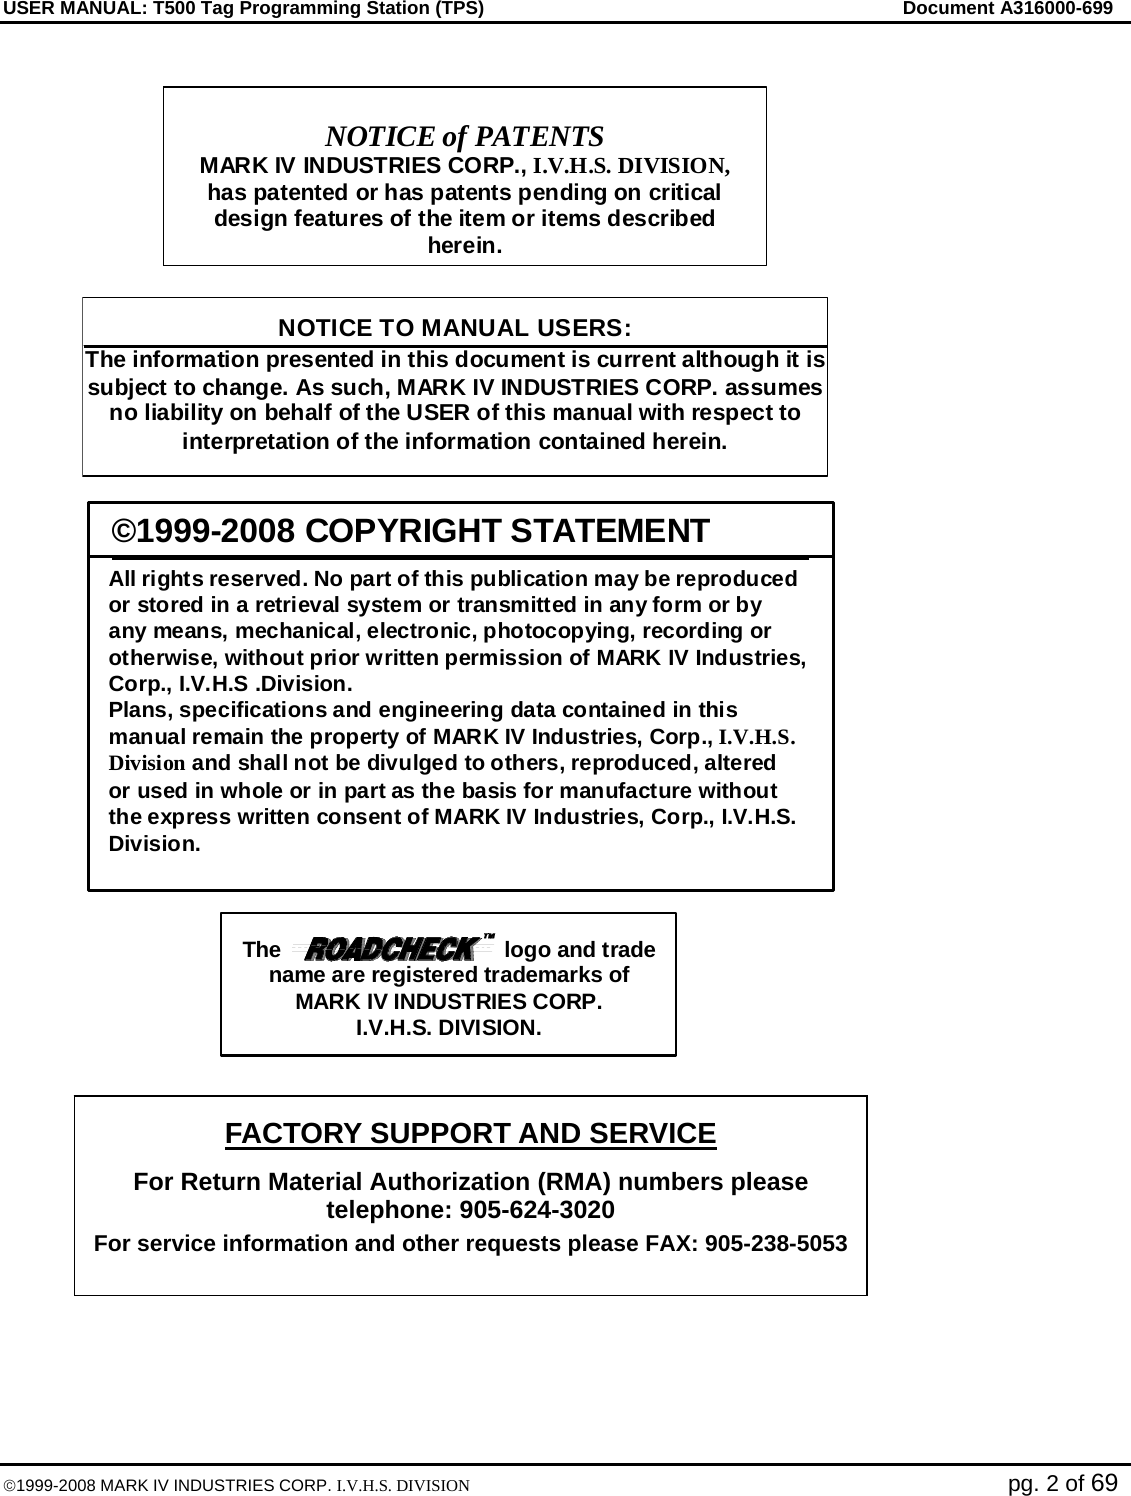 USER MANUAL: T500 Tag Programming Station (TPS)     Document A316000-699  ©1999-2008 MARK IV INDUSTRIES CORP. I.V.H.S. DIVISION   pg. 2 of 69              NOTICE TO MANUAL USERS: The information presented in this document is current although it is subject to change. As such, MARK IV INDUSTRIES CORP. assumes no liability on behalf of the USER of this manual with respect to interpretation of the information contained herein.   NOTICE of PATENTS MARK IV INDUSTRIES CORP., I.V.H.S. DIVISION, has patented or has patents pending on critical design features of the item or items described herein.  ©1999-2008 COPYRIGHT STATEMENT All rights reserved. No part of this publication may be reproduced or stored in a retrieval system or transmitted in any form or by any means, mechanical, electronic, photocopying, recording orotherwise, without prior written permission of MARK IV Industries, Corp., I.V.H.S .Division. Plans, specifications and engineering data contained in thismanual remain the property of MARK IV Industries, Corp., I.V.H.S.Division and shall not be divulged to others, reproduced, altered or used in whole or in part as the basis for manufacture without  the express written consent of MARK IV Industries, Corp., I.V.H.S.Division.  The                                    logo and trade name are registered trademarks of MARK IV INDUSTRIES CORP. I.V.H.S. DIVISION. FACTORY SUPPORT AND SERVICE For Return Material Authorization (RMA) numbers please telephone: 905-624-3020 For service information and other requests please FAX: 905-238-5053  